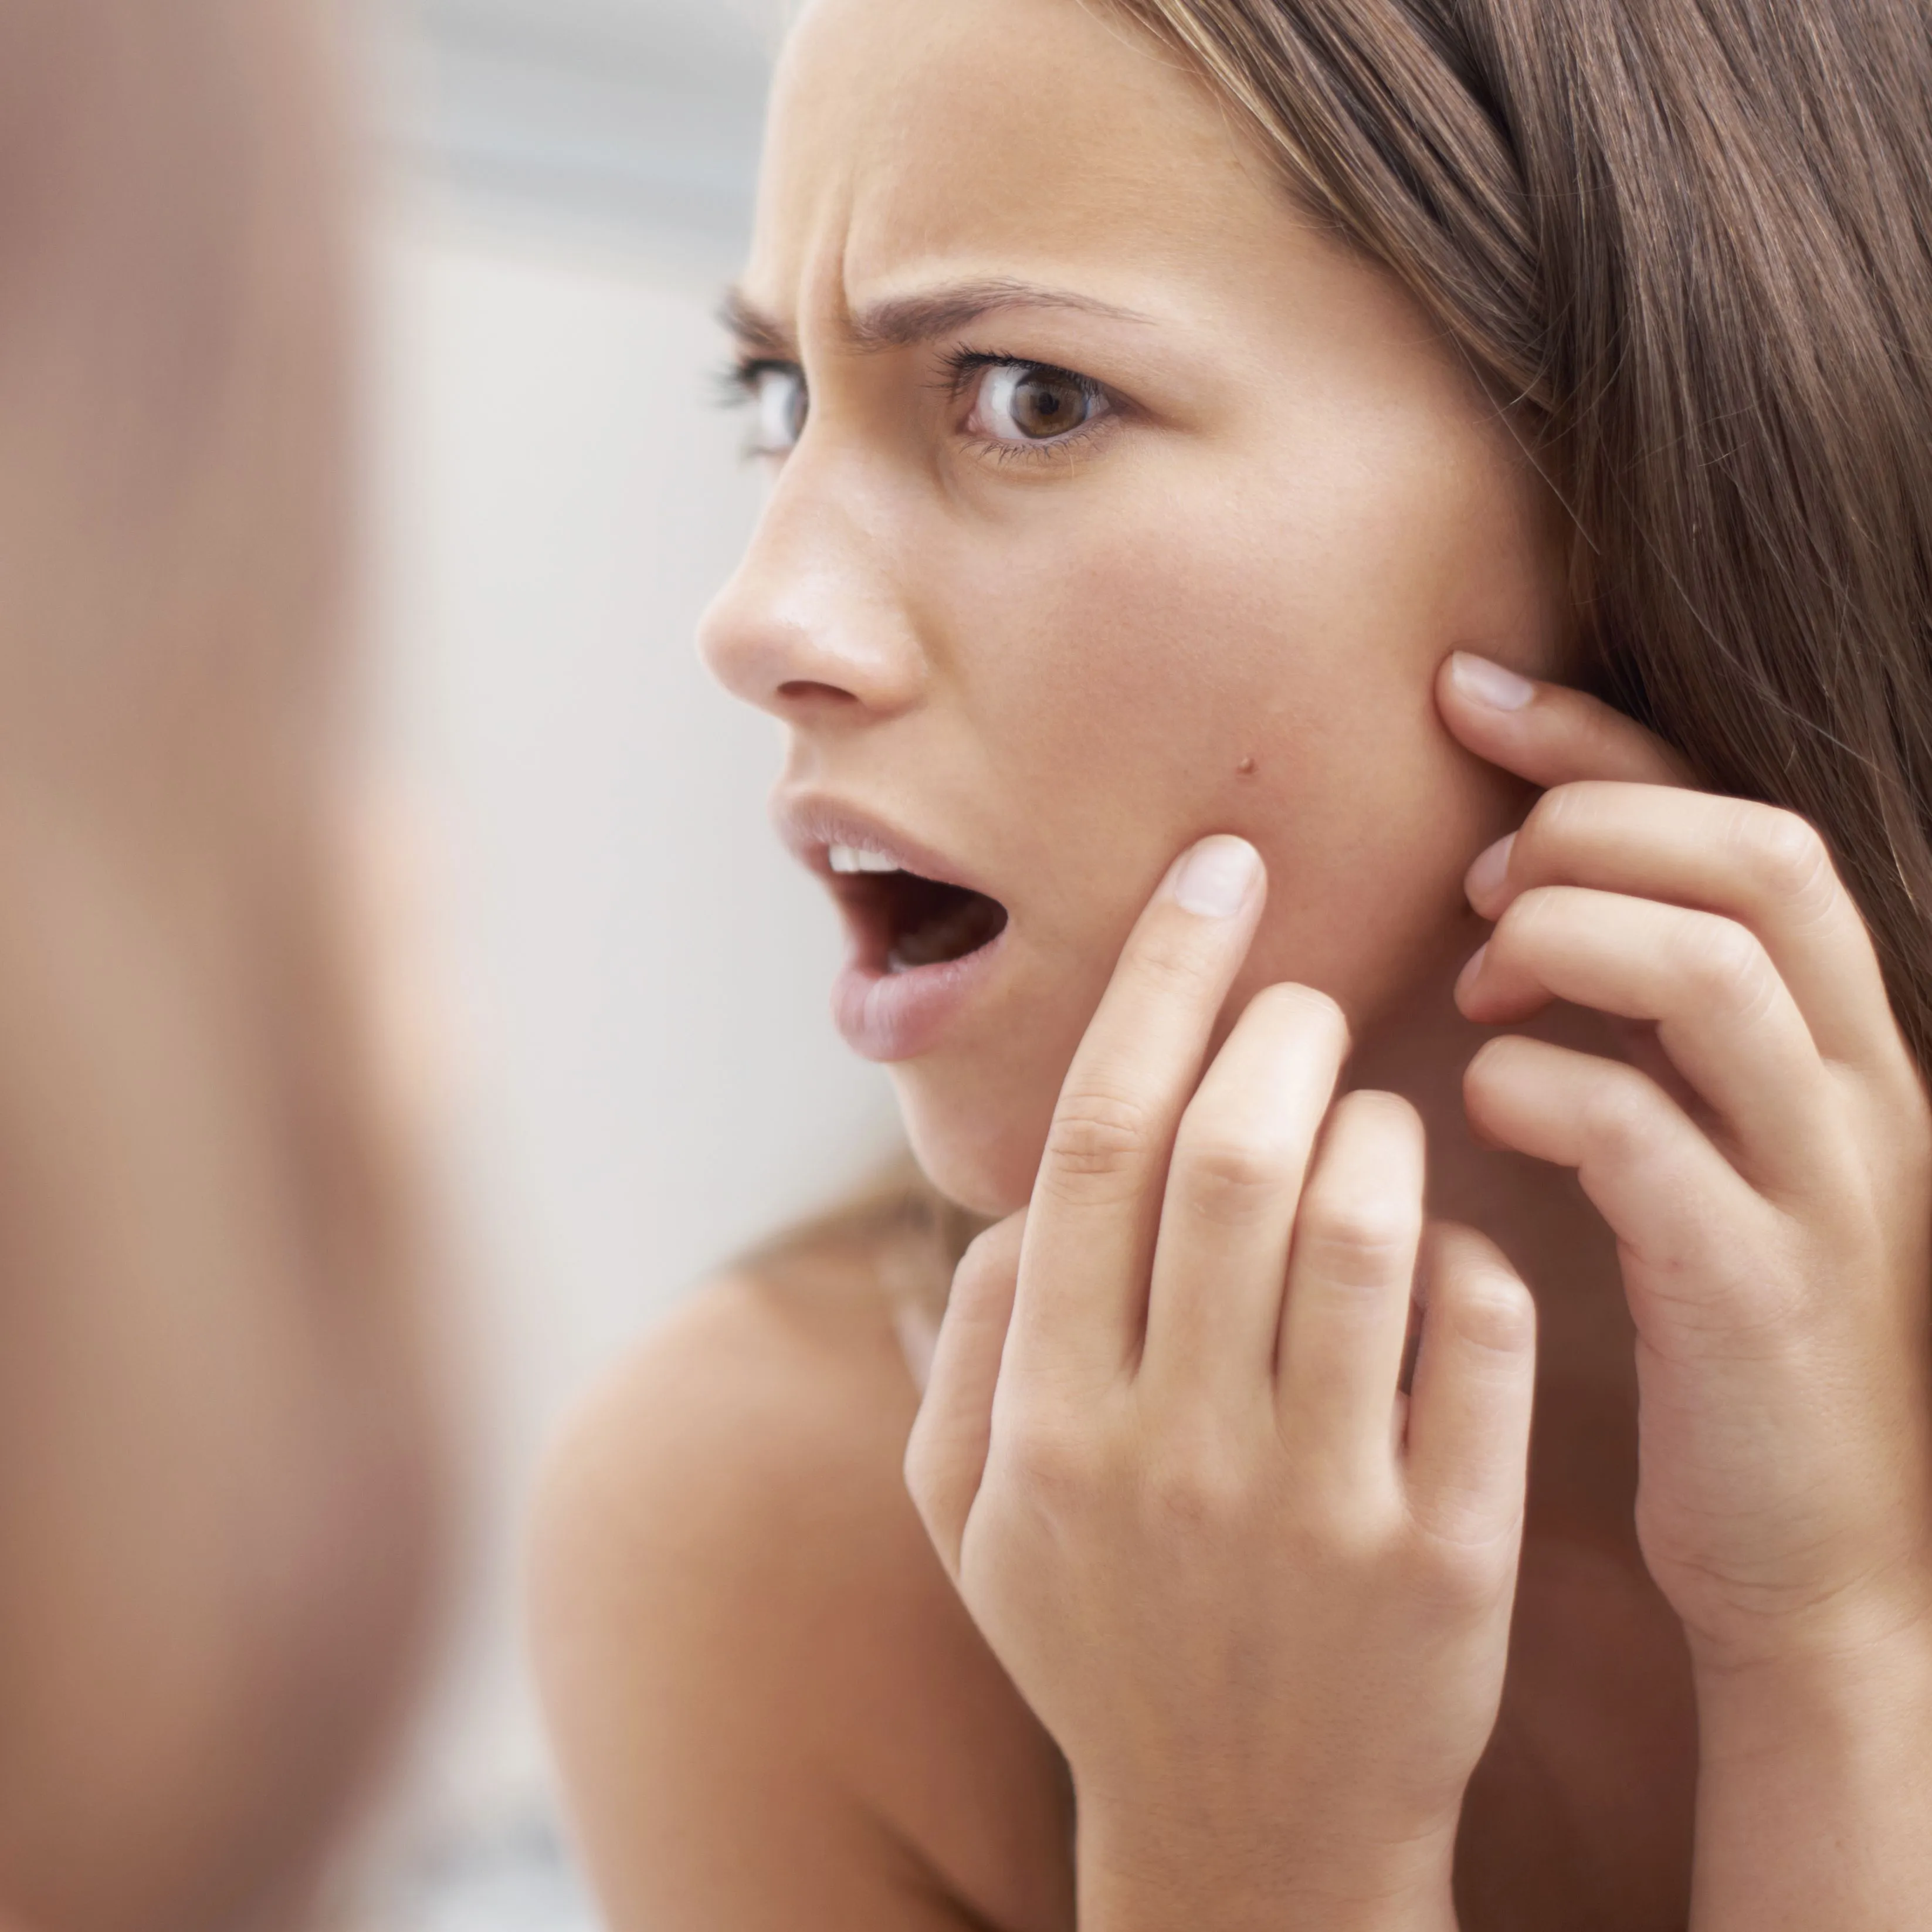 Adult Acne Most Popular Causes and Questions-Mediterranean Beauty